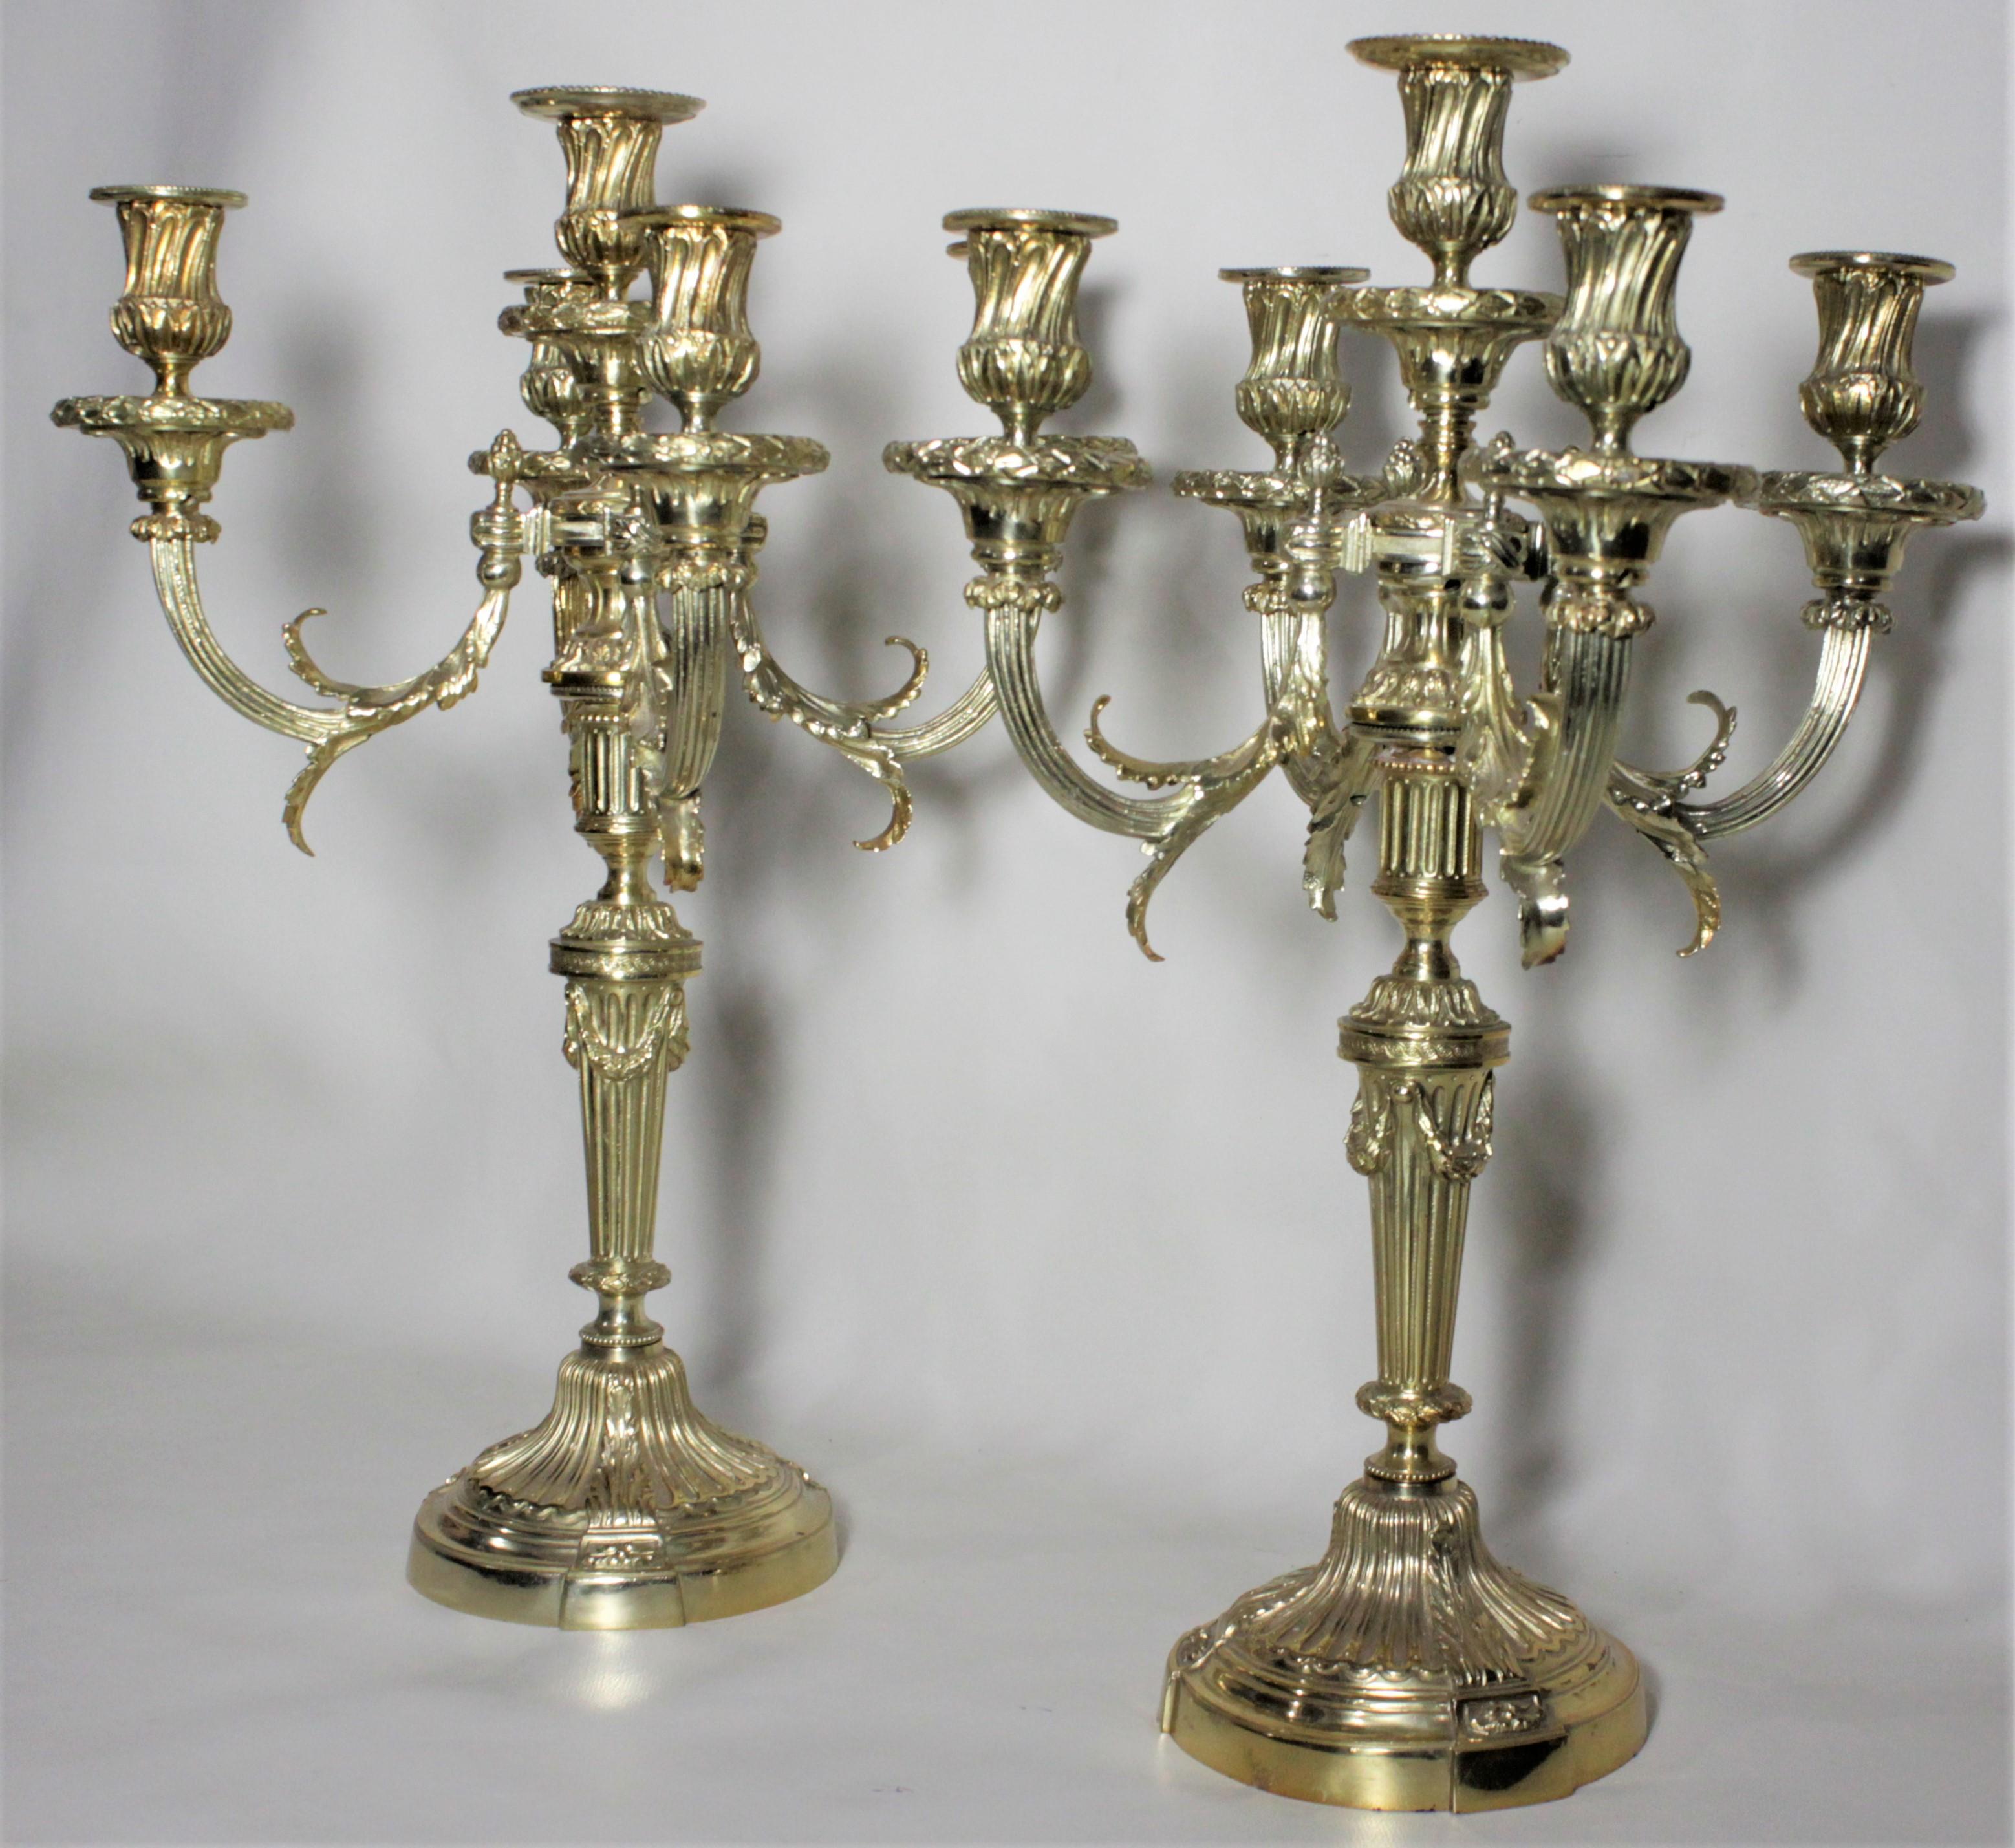 Pair of Antique Empire Style Four Branch Gilt Bronze Candelabras For Sale 2